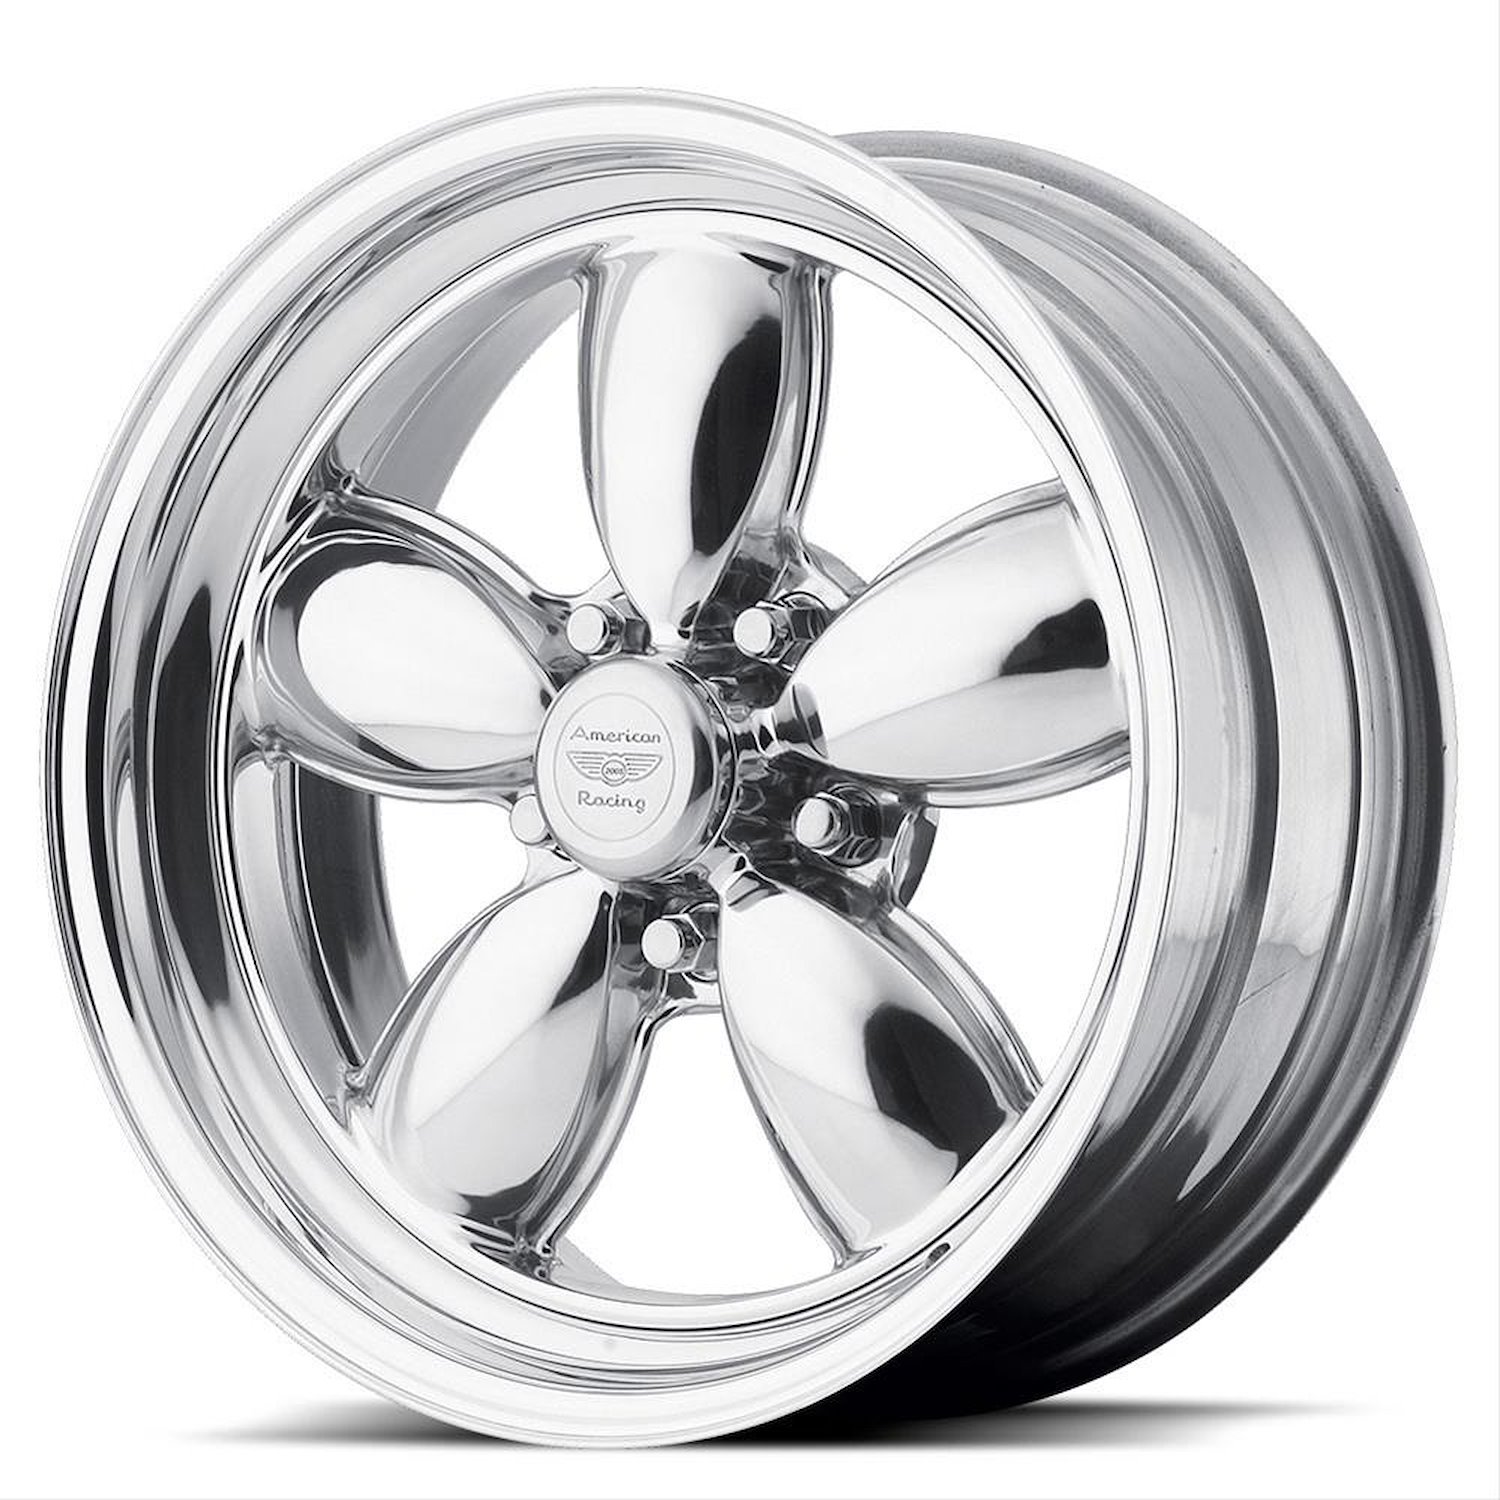 AMERICAN RACING CLASSIC 200S TWO-PIECE POLISHED 17 x 8 5X4.75 0 4.50